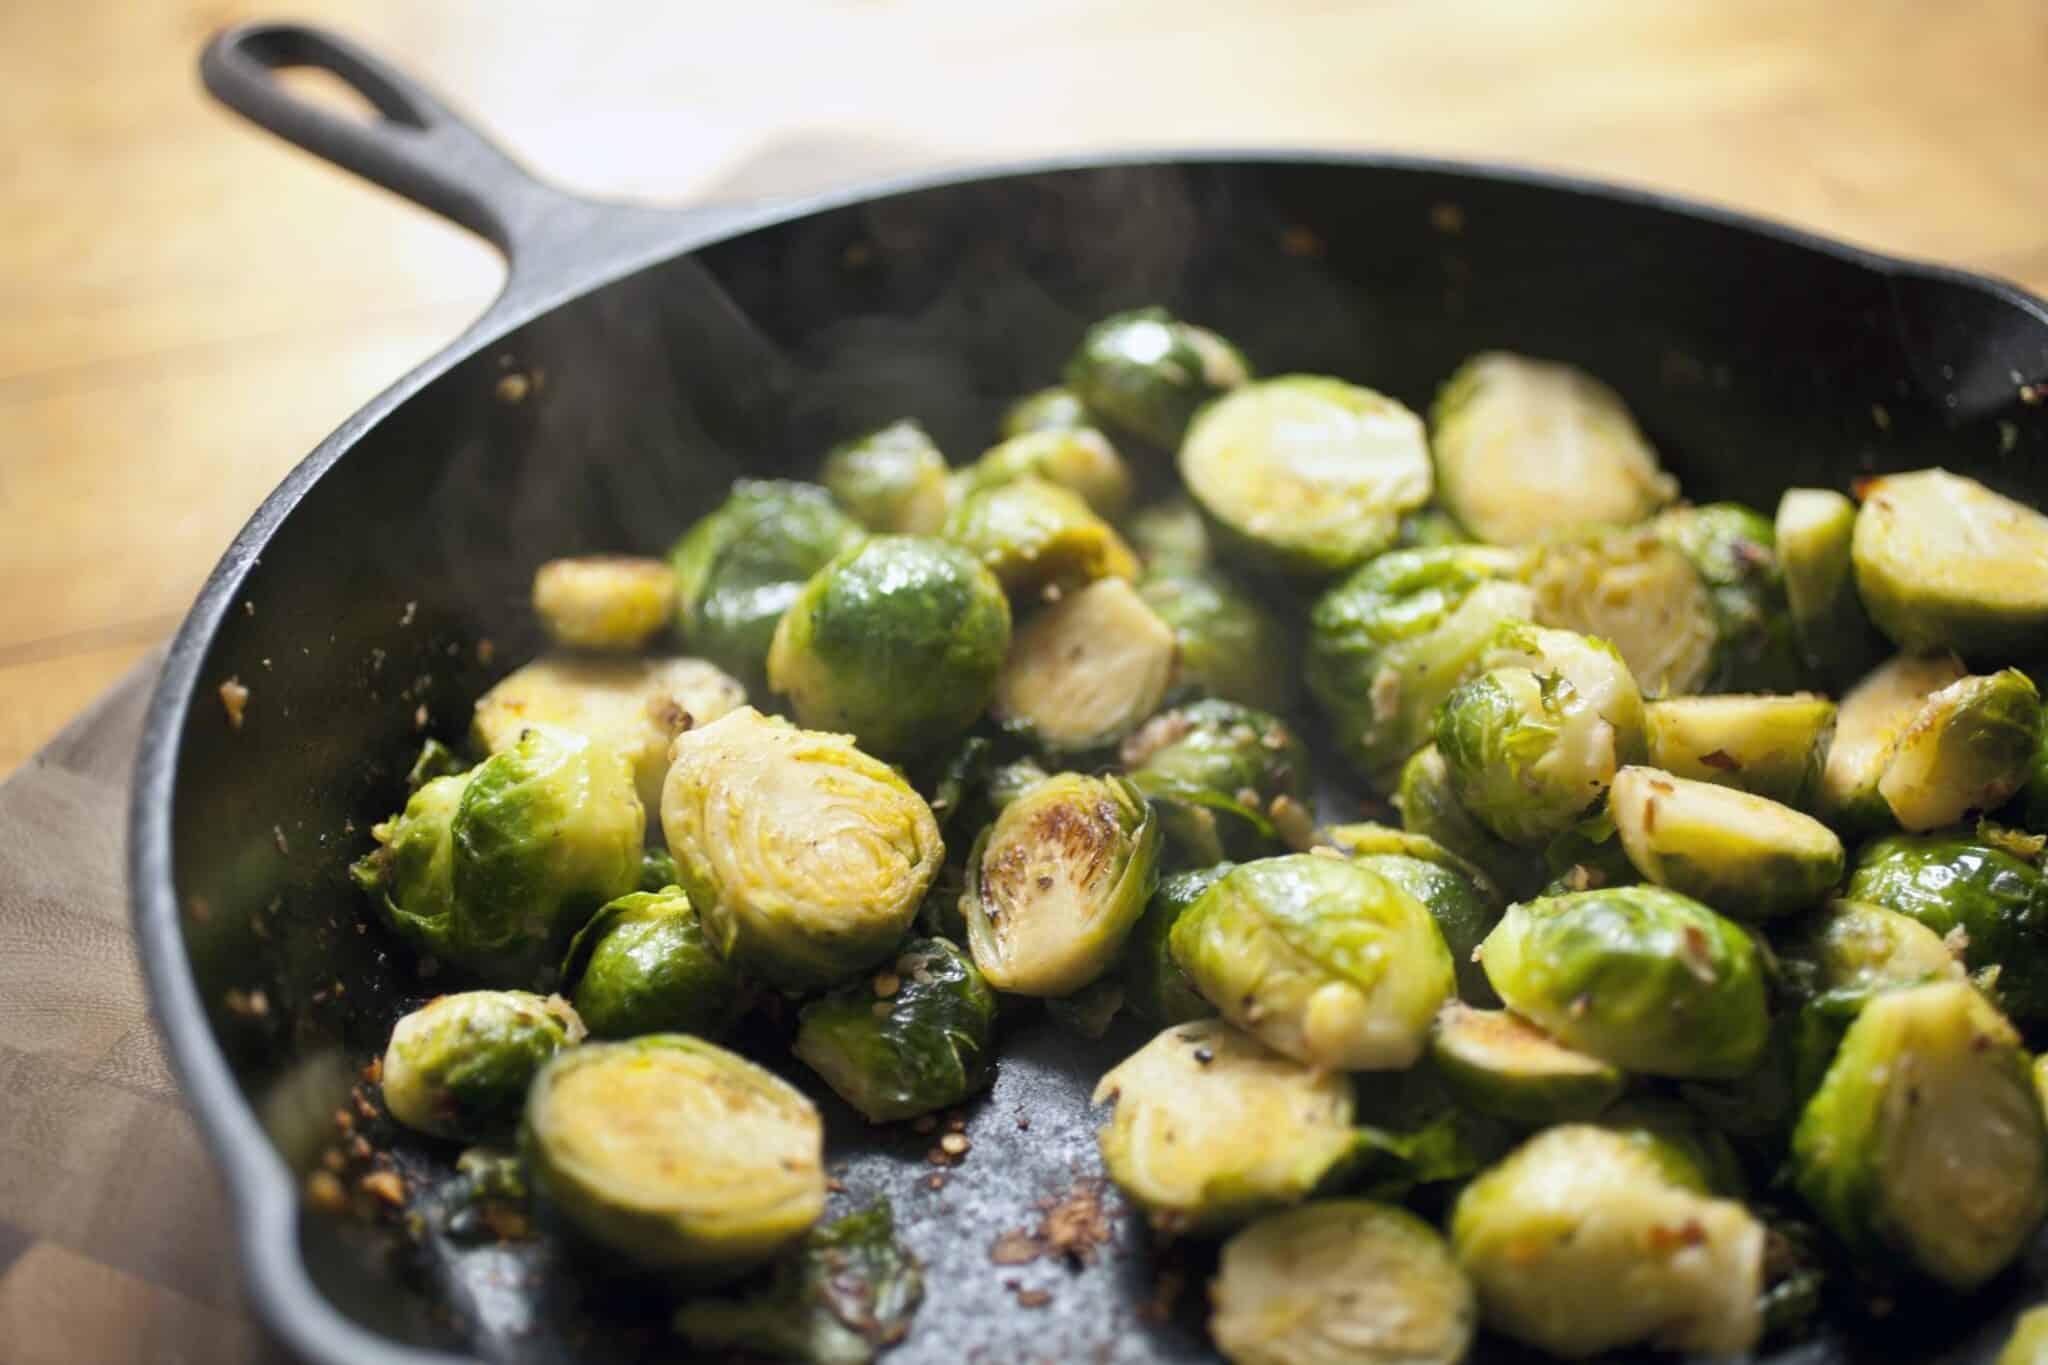 brussels sprouts hot off the stove with steam rising from the pan